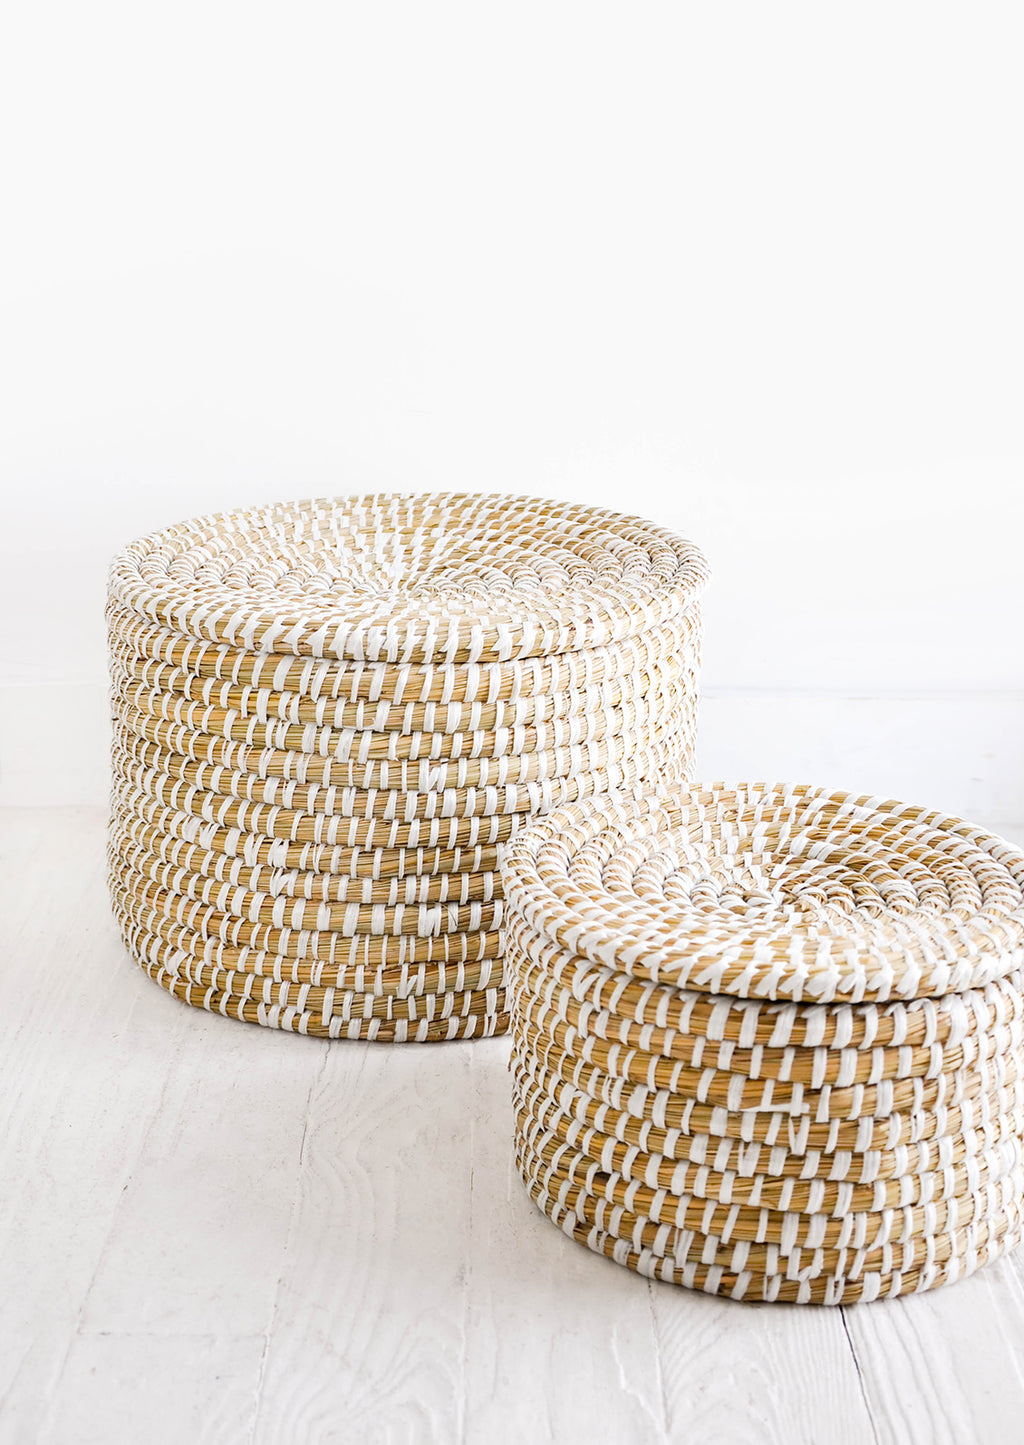 3: Small and large sizes of round, lidded seagrass baskets